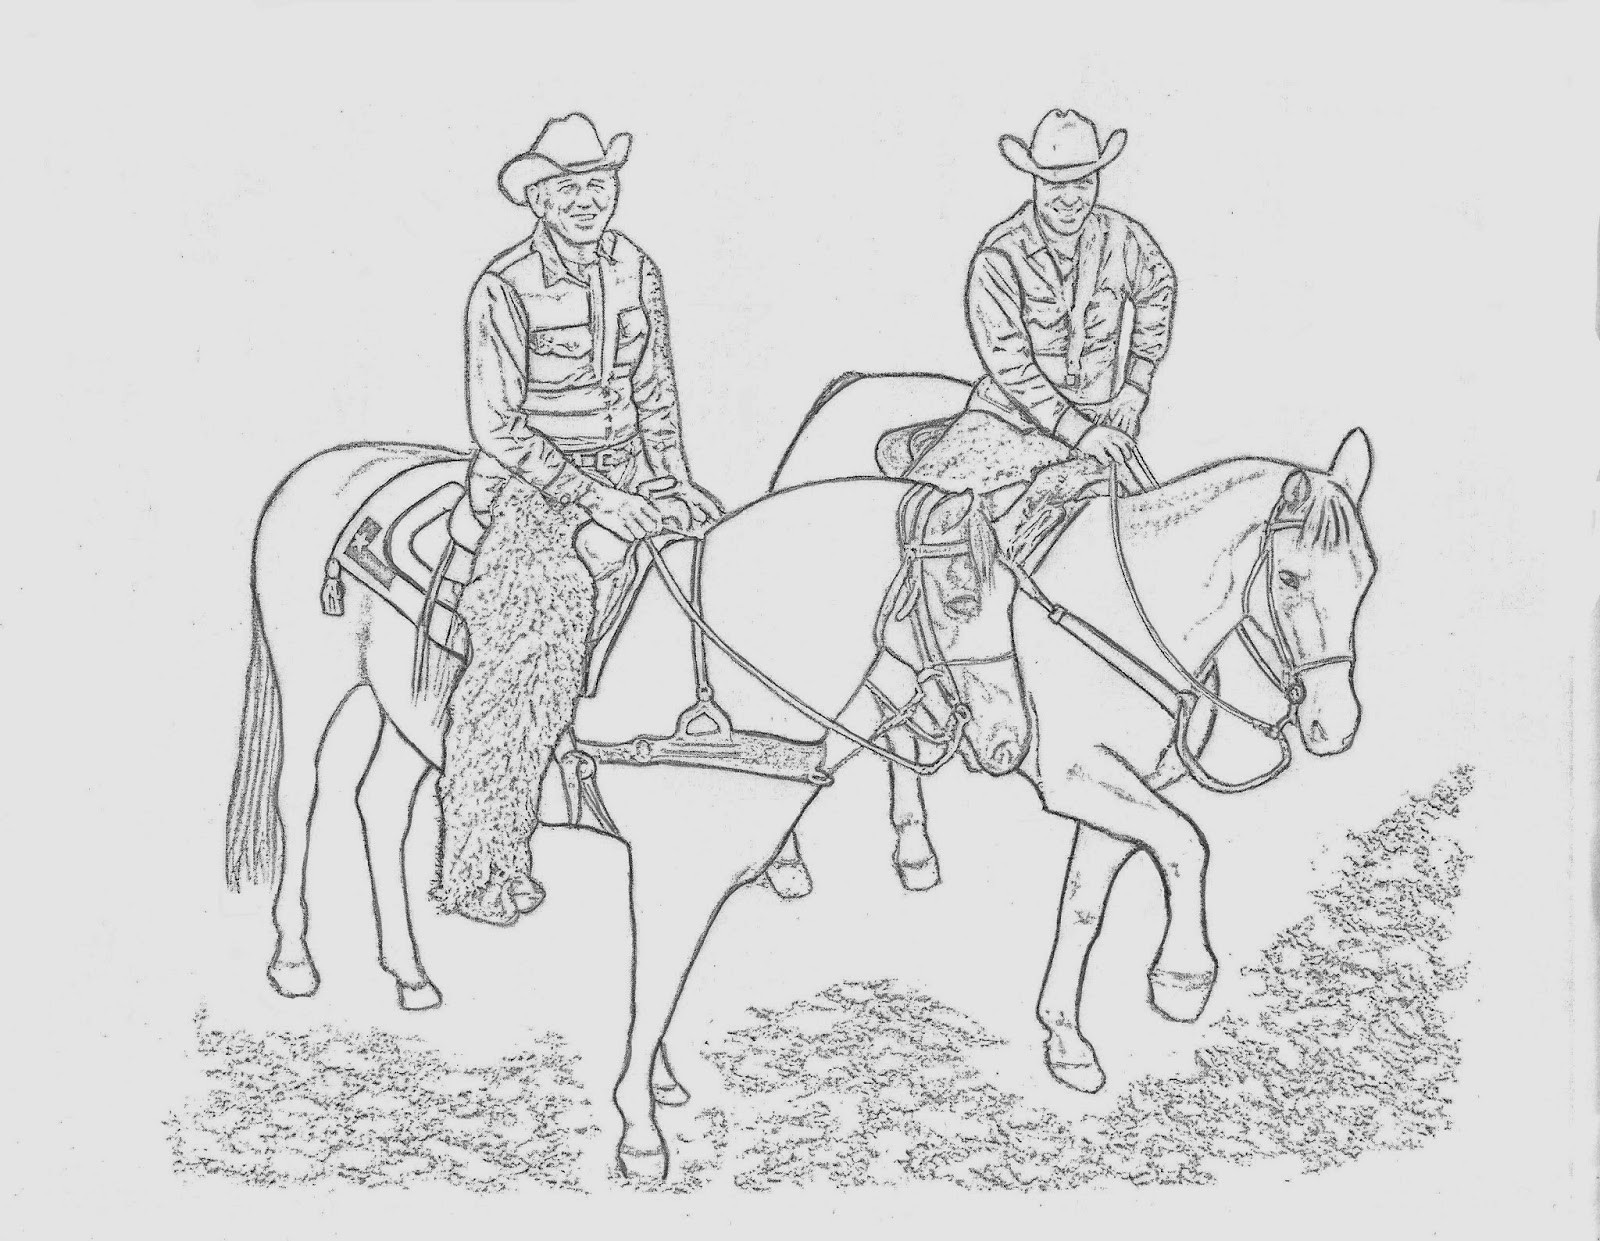 Cowgirl On A Horse Coloring Pages
 WESTERN COLORING PAGES COWBOYS ON HORSES COLORING PAGE By